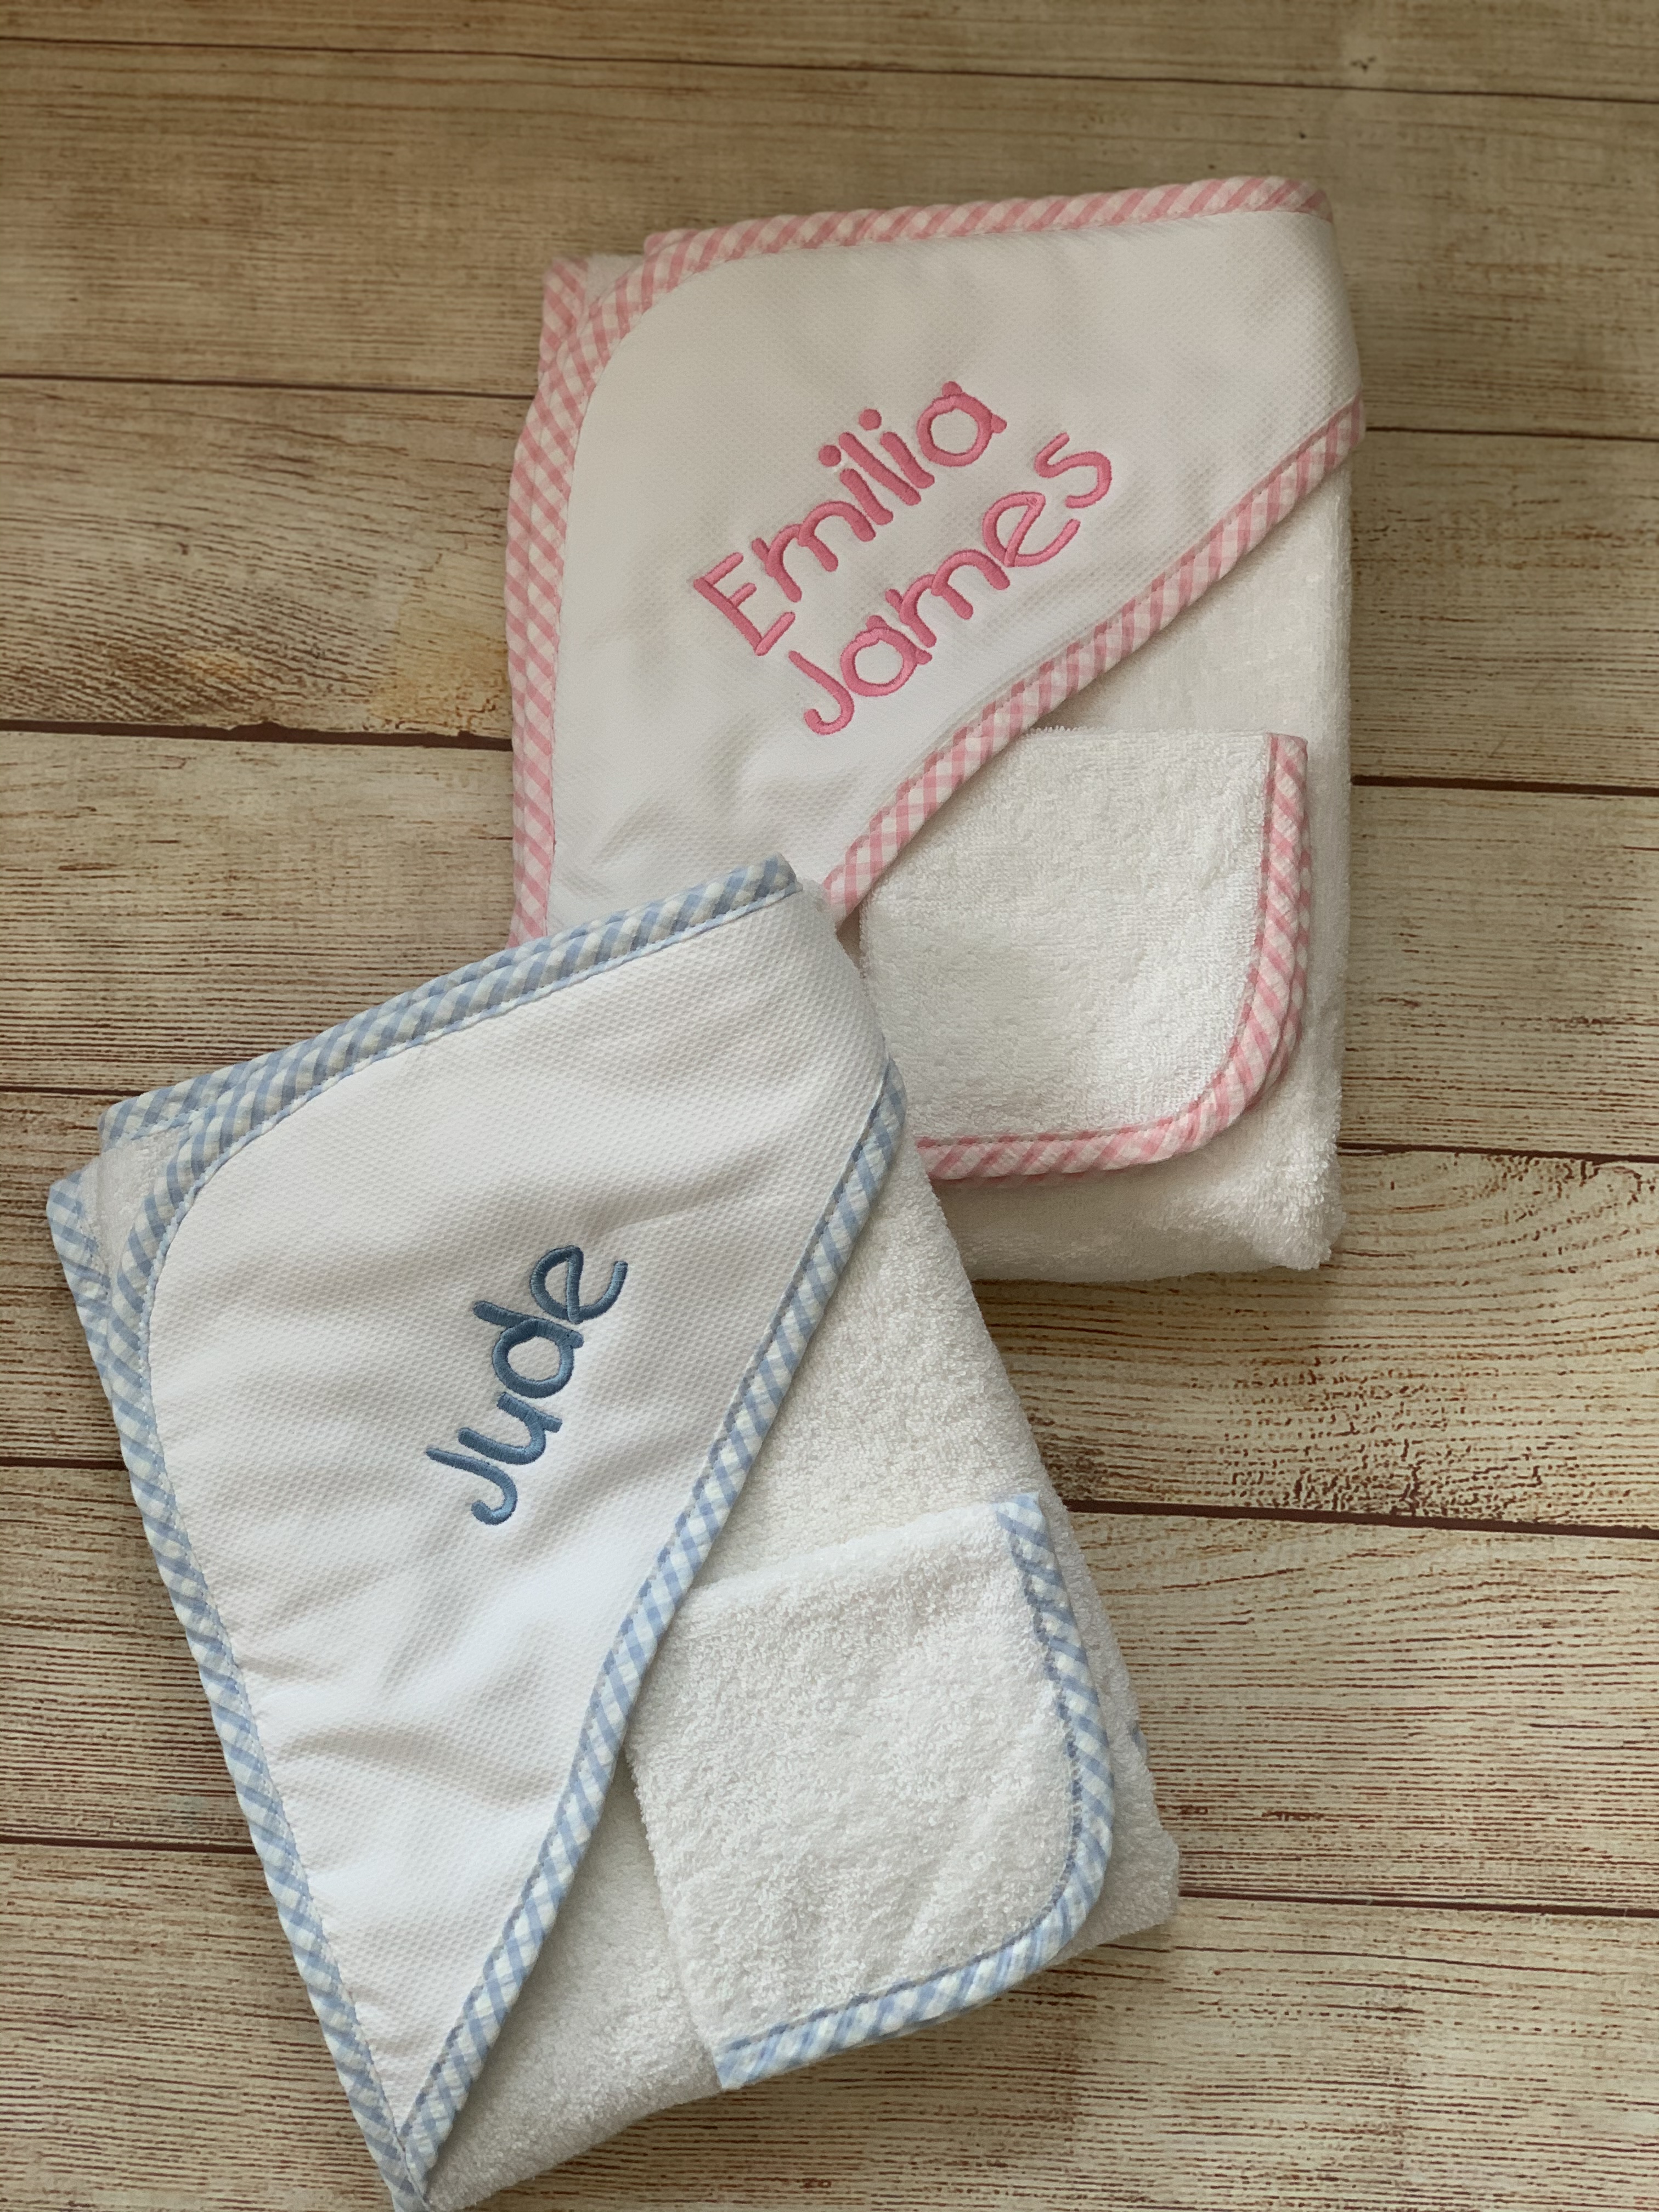 Baby Hooded Towel and Wash Cloth by Wicked Stitches Gifts.